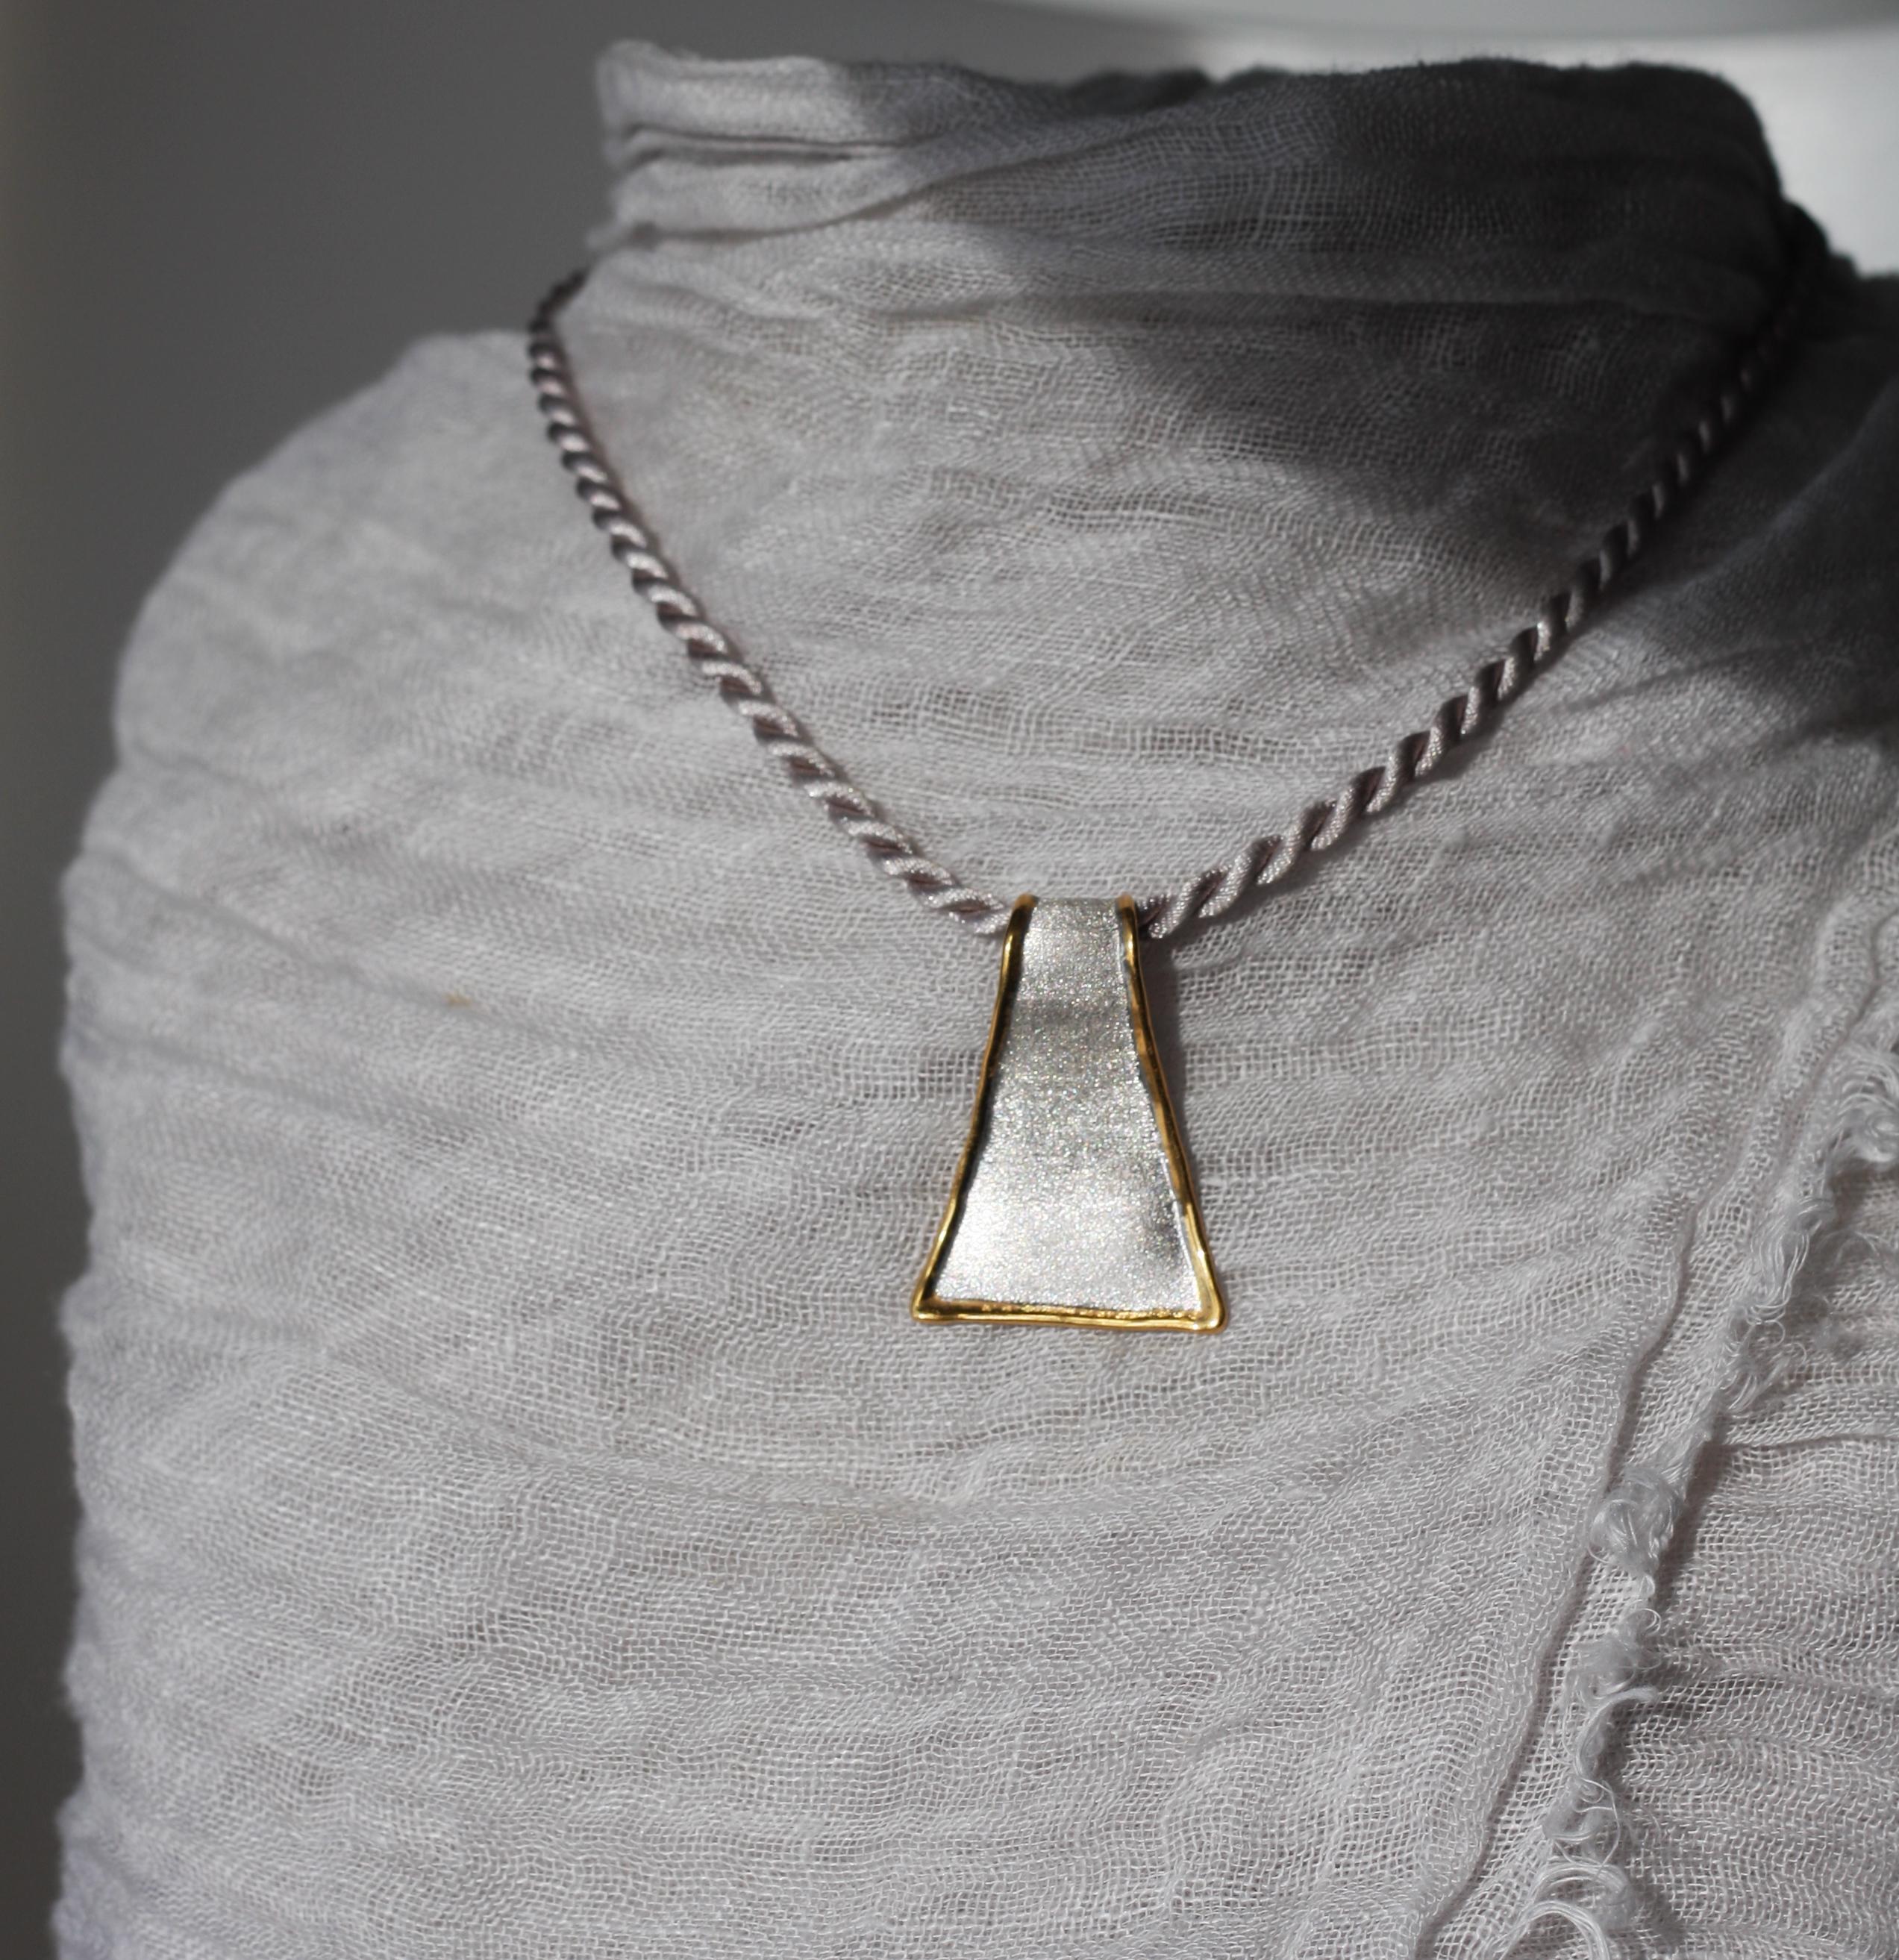 This is a triangular shape Yianni Creations pendant from Midas Collection all handmade in Greece from fine silver 950 purity and plated with palladium to resist tarnish. This artisan pendant enhancer in its purity shines due to its texture. The